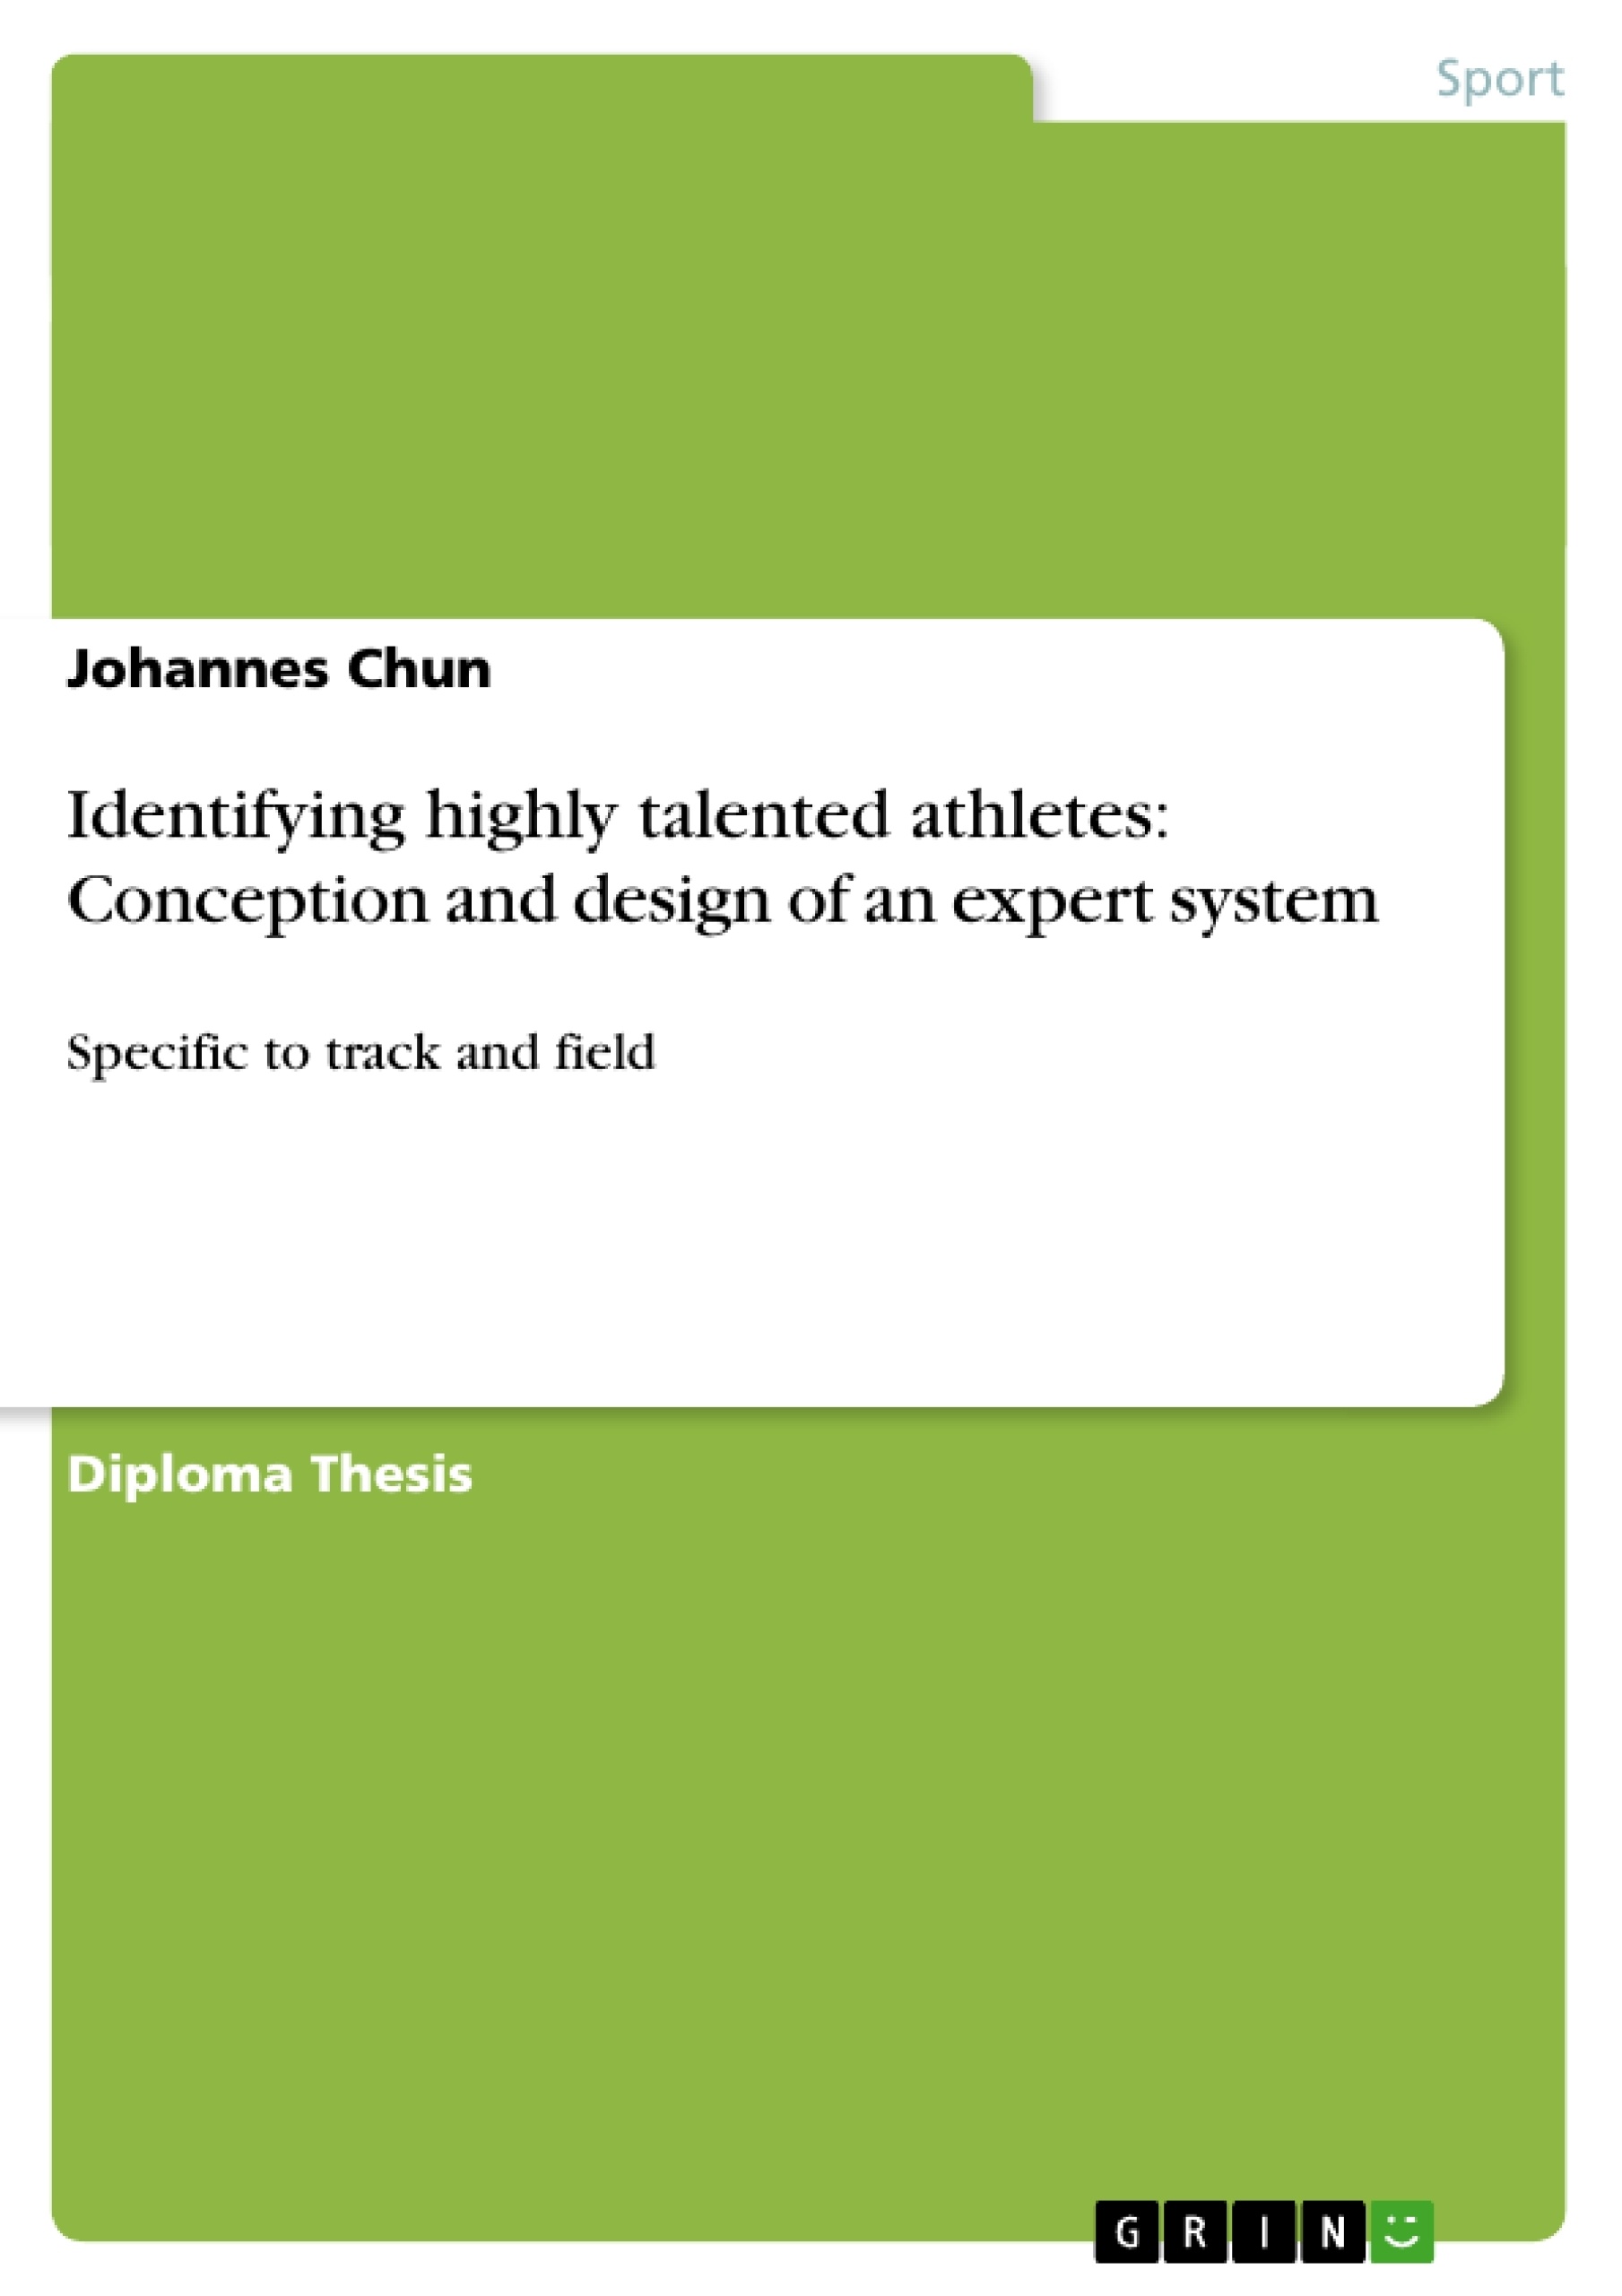 Titel: Identifying highly talented athletes: Conception and design of an expert system